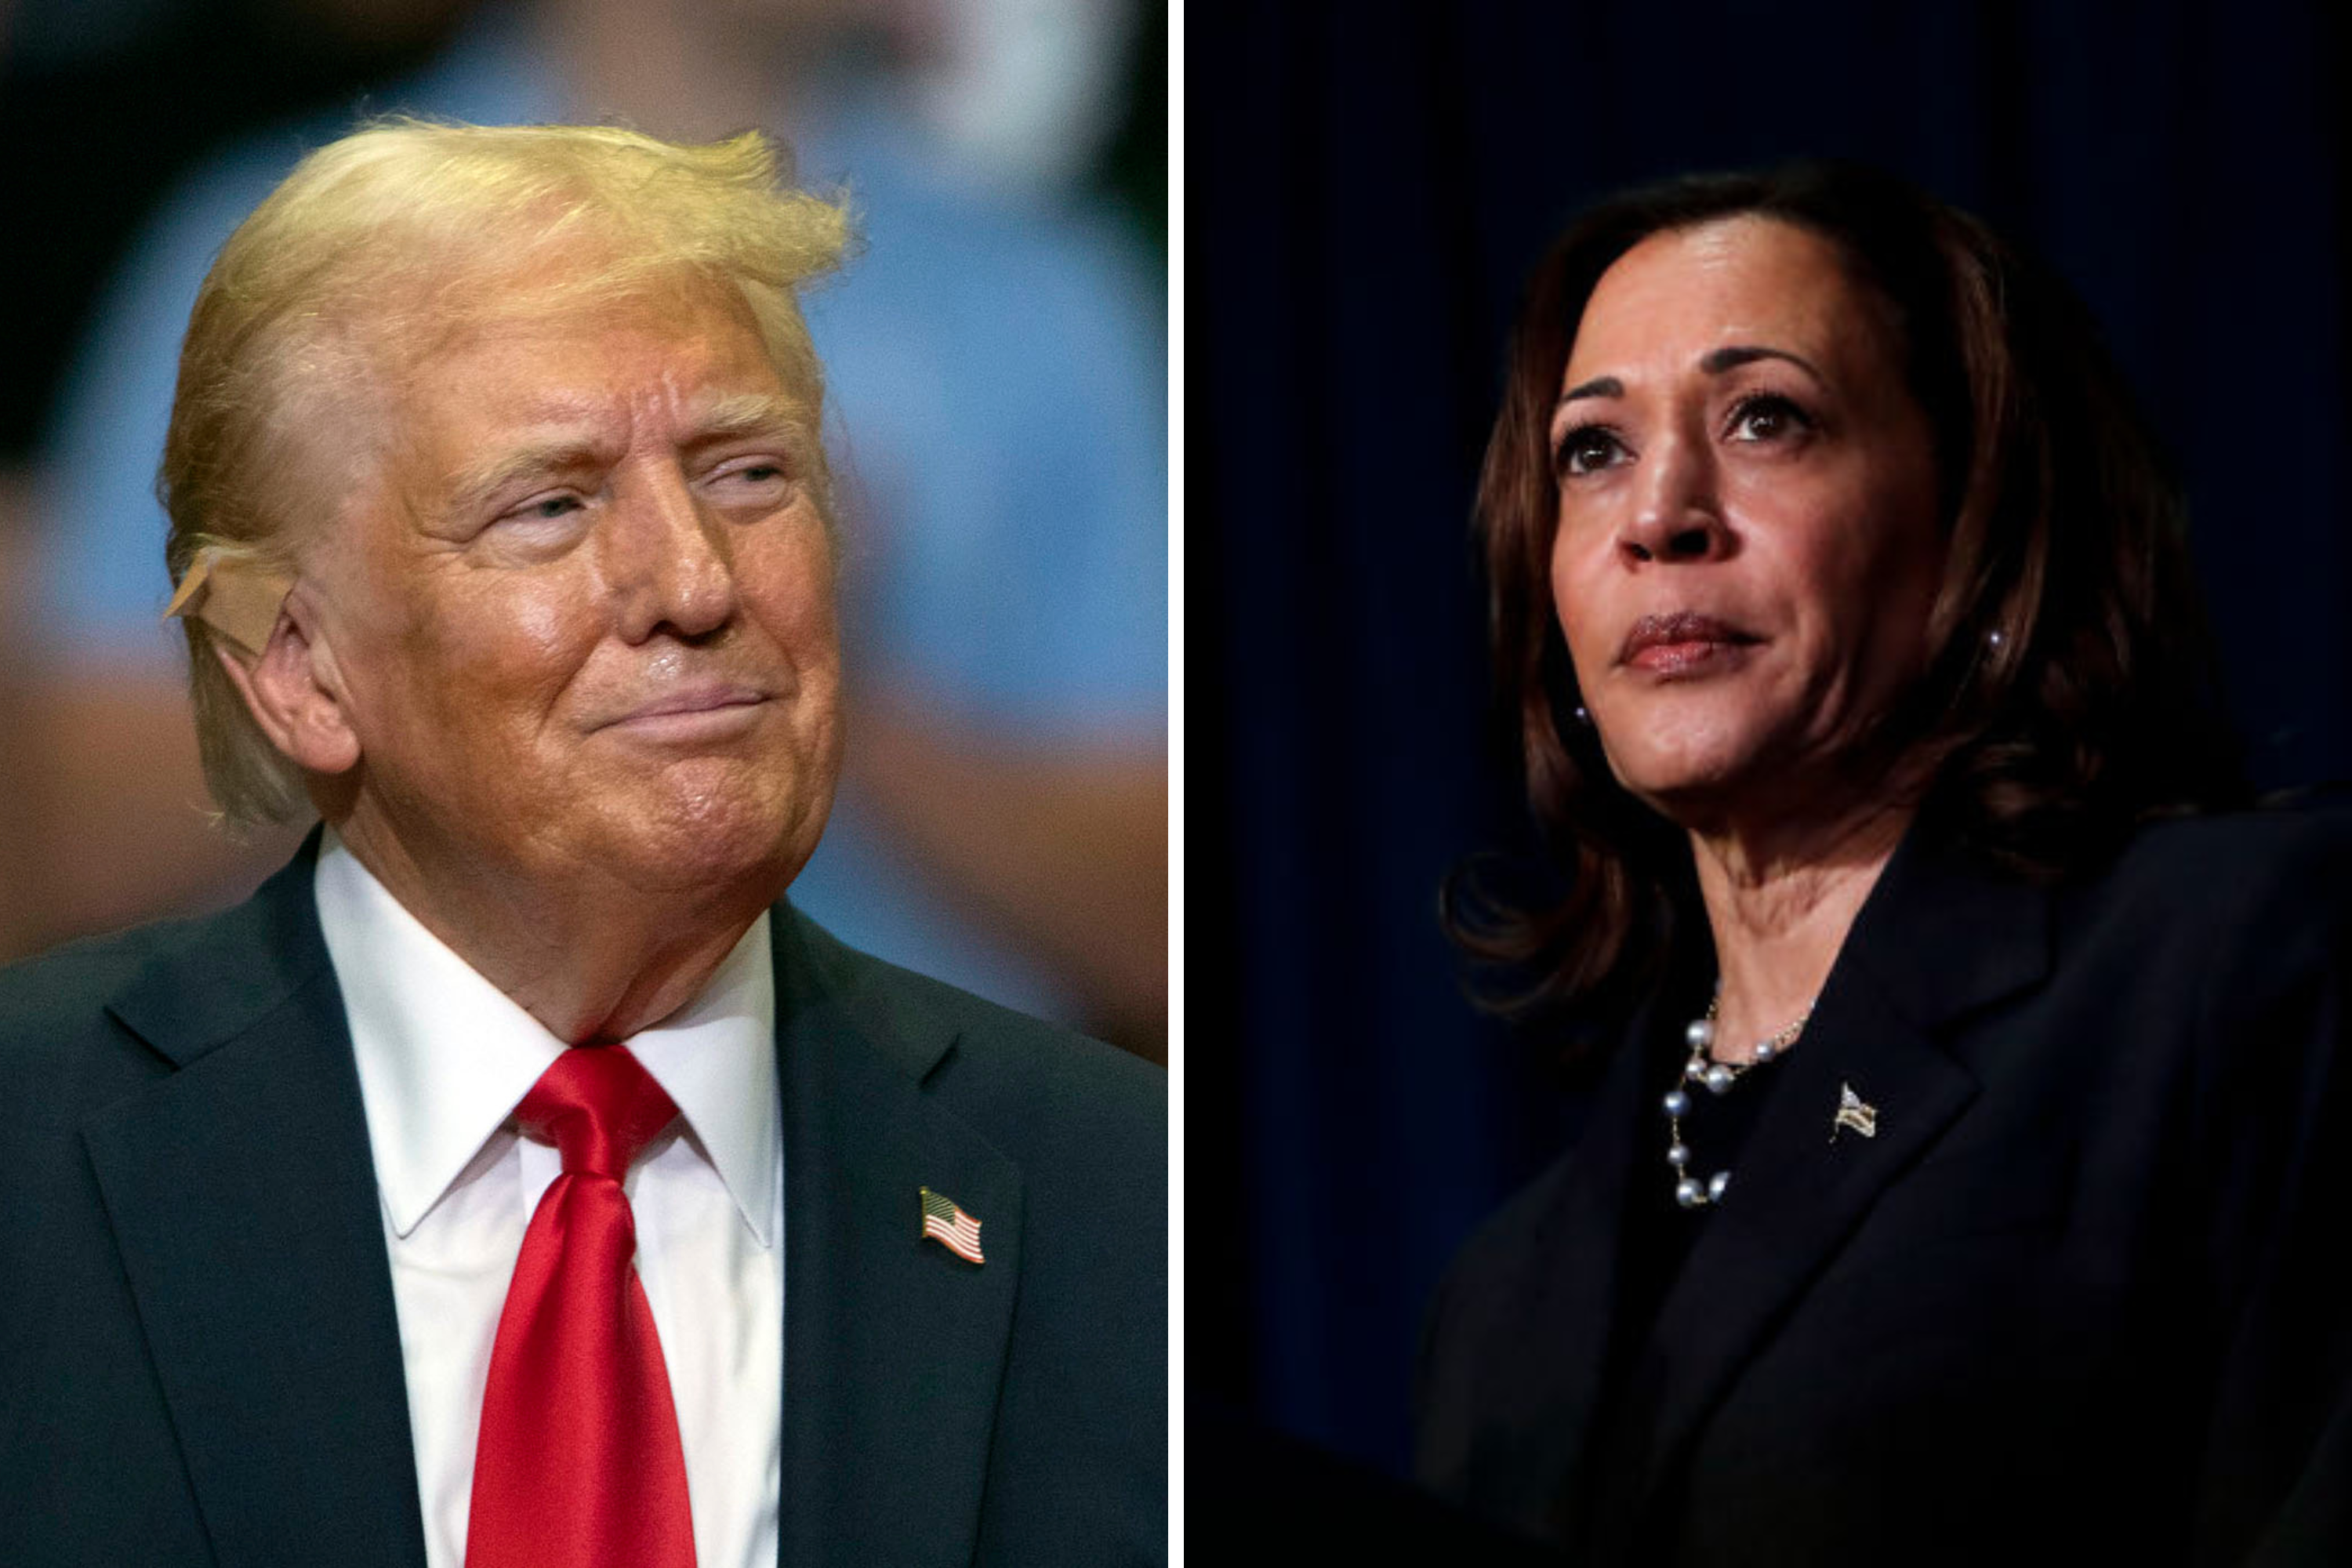 Kamala Harris vs. Donald Trump: Where They Stand on 5 Key Science Issues